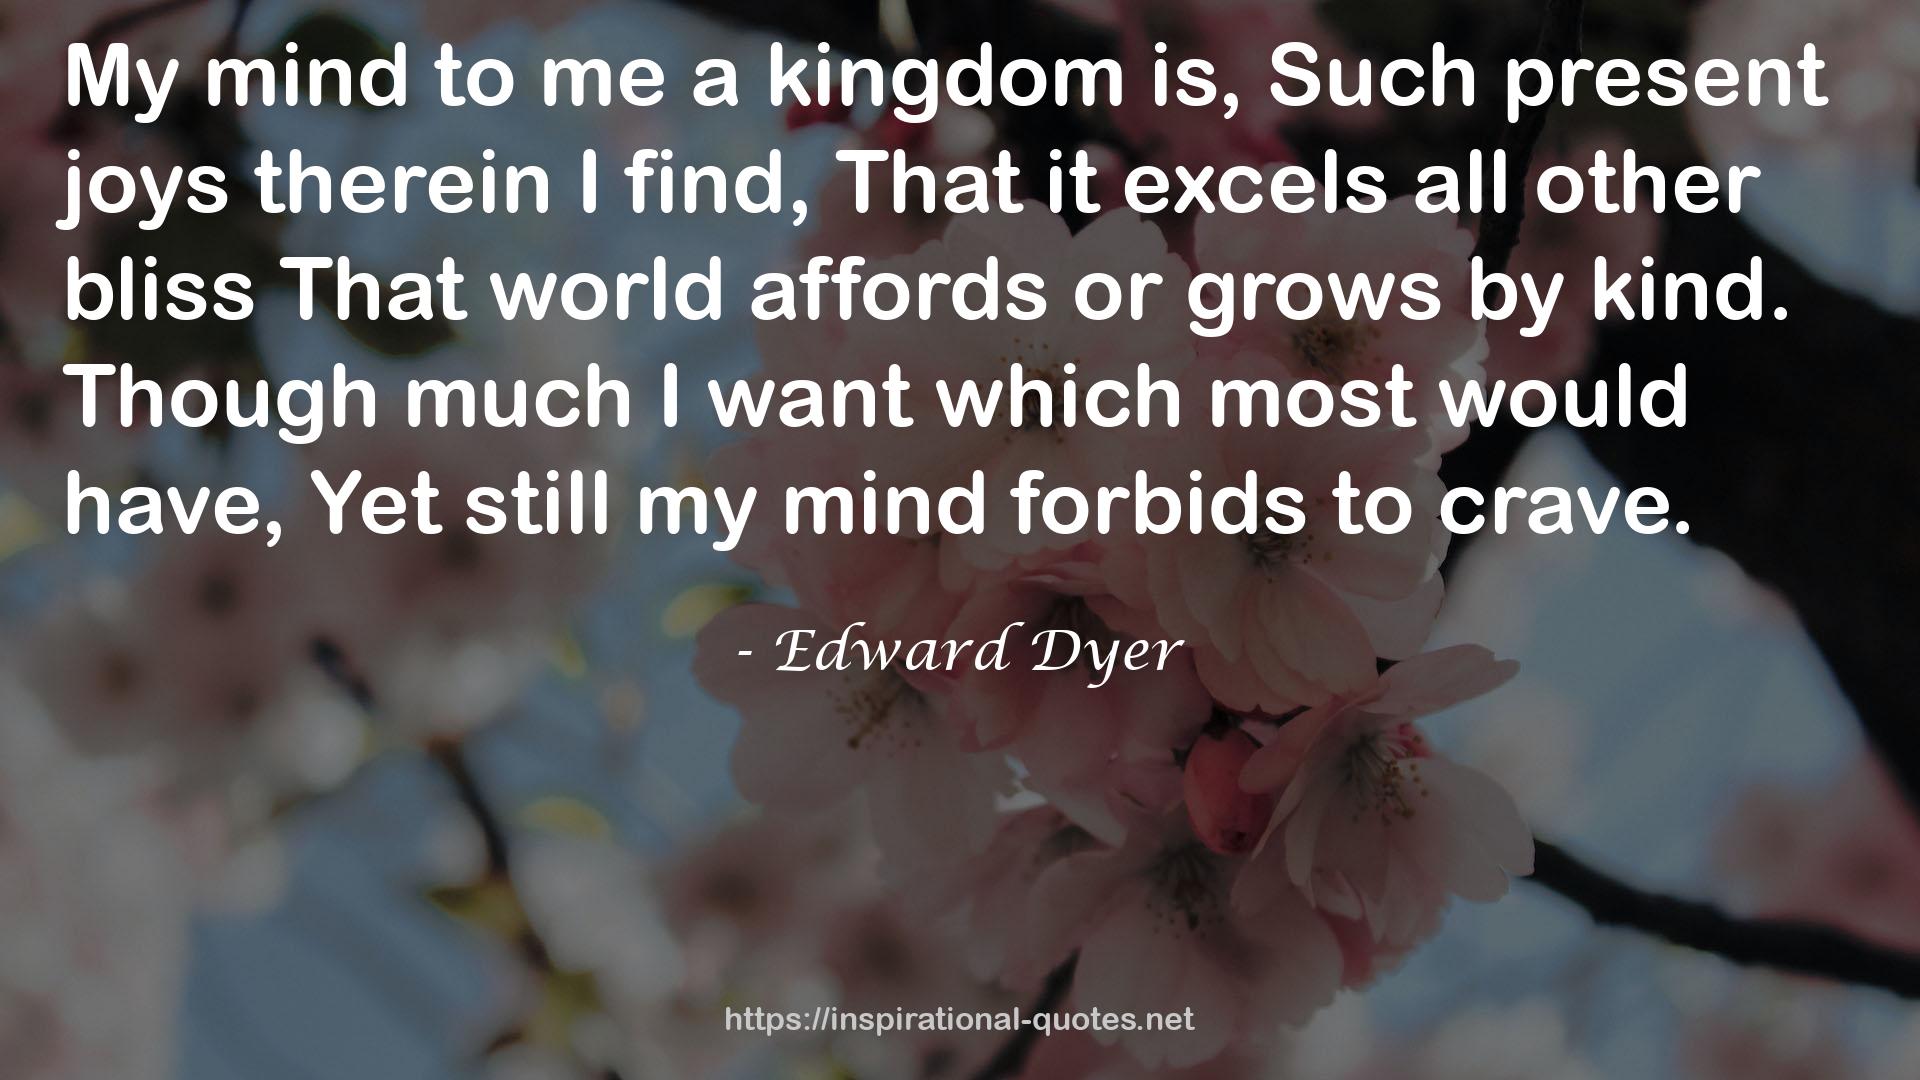 Edward Dyer QUOTES